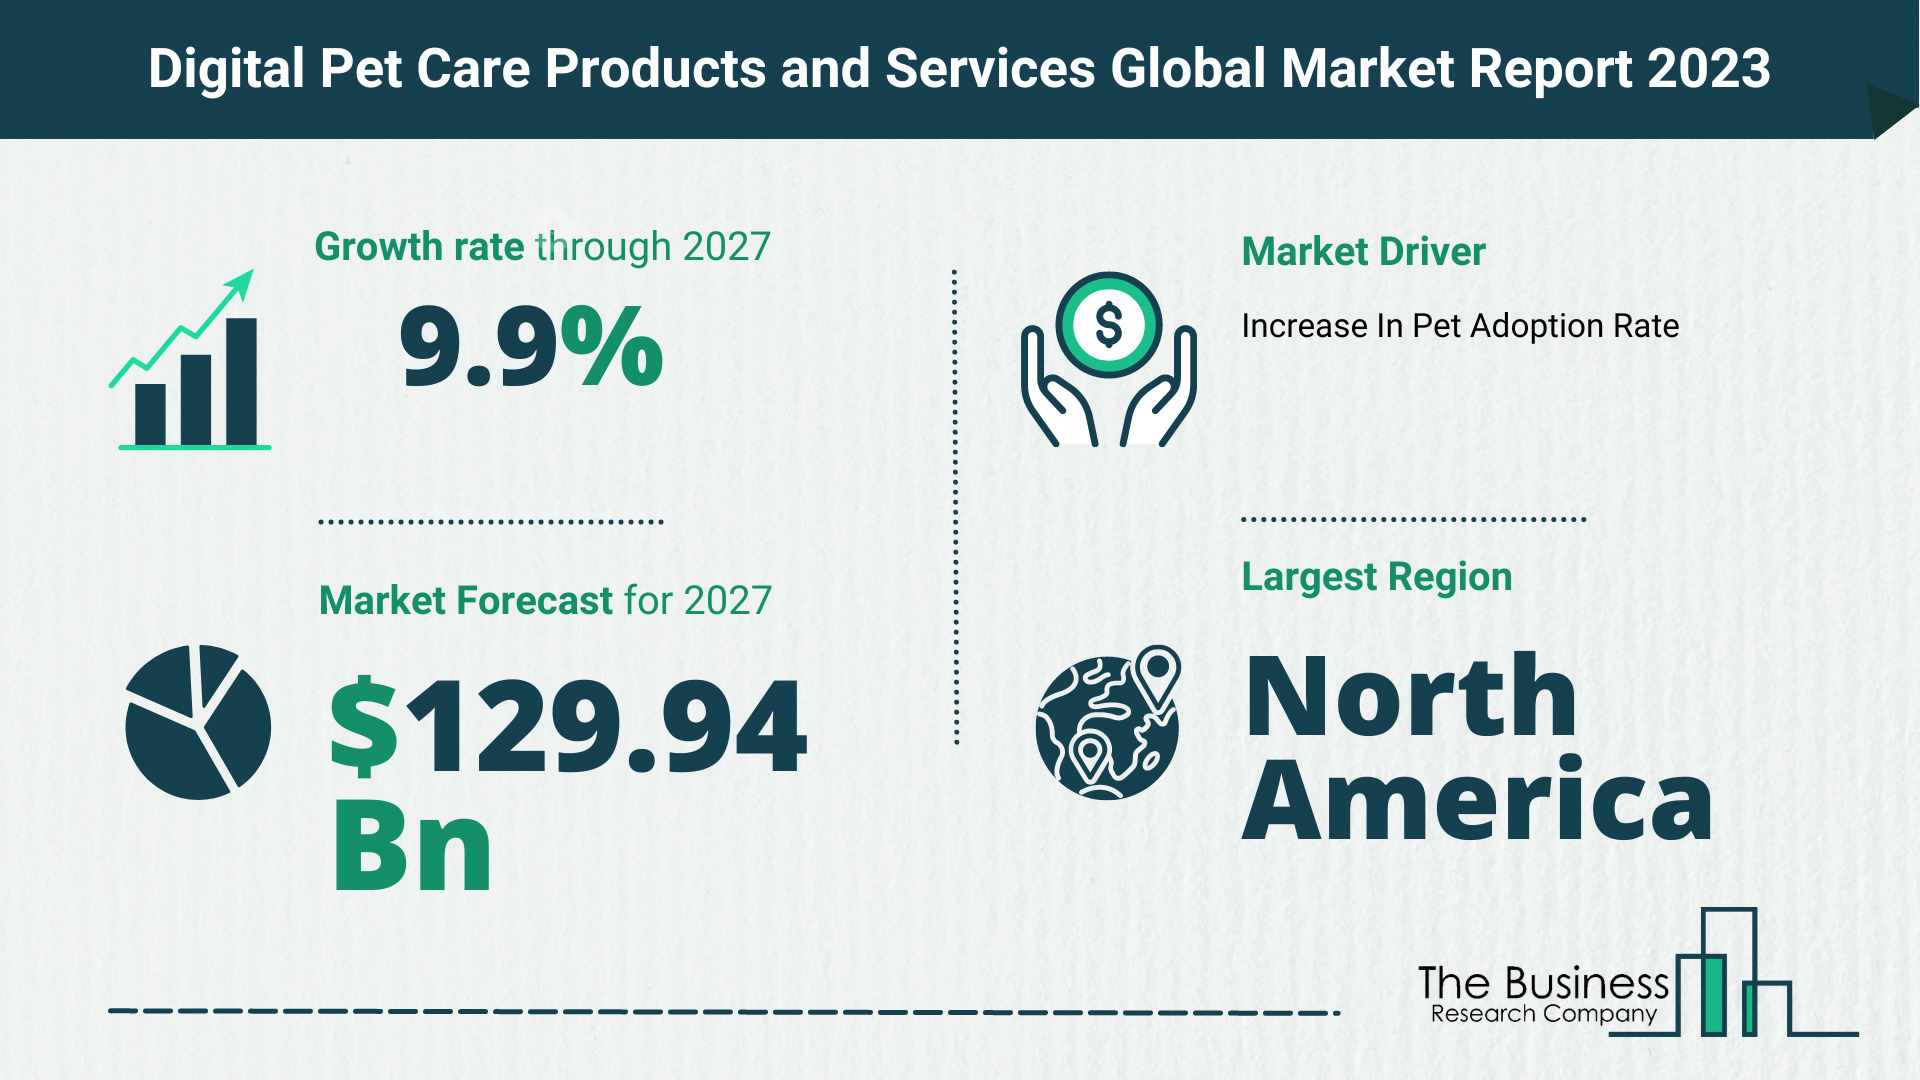 Global Digital Pet Care Products and Services Market